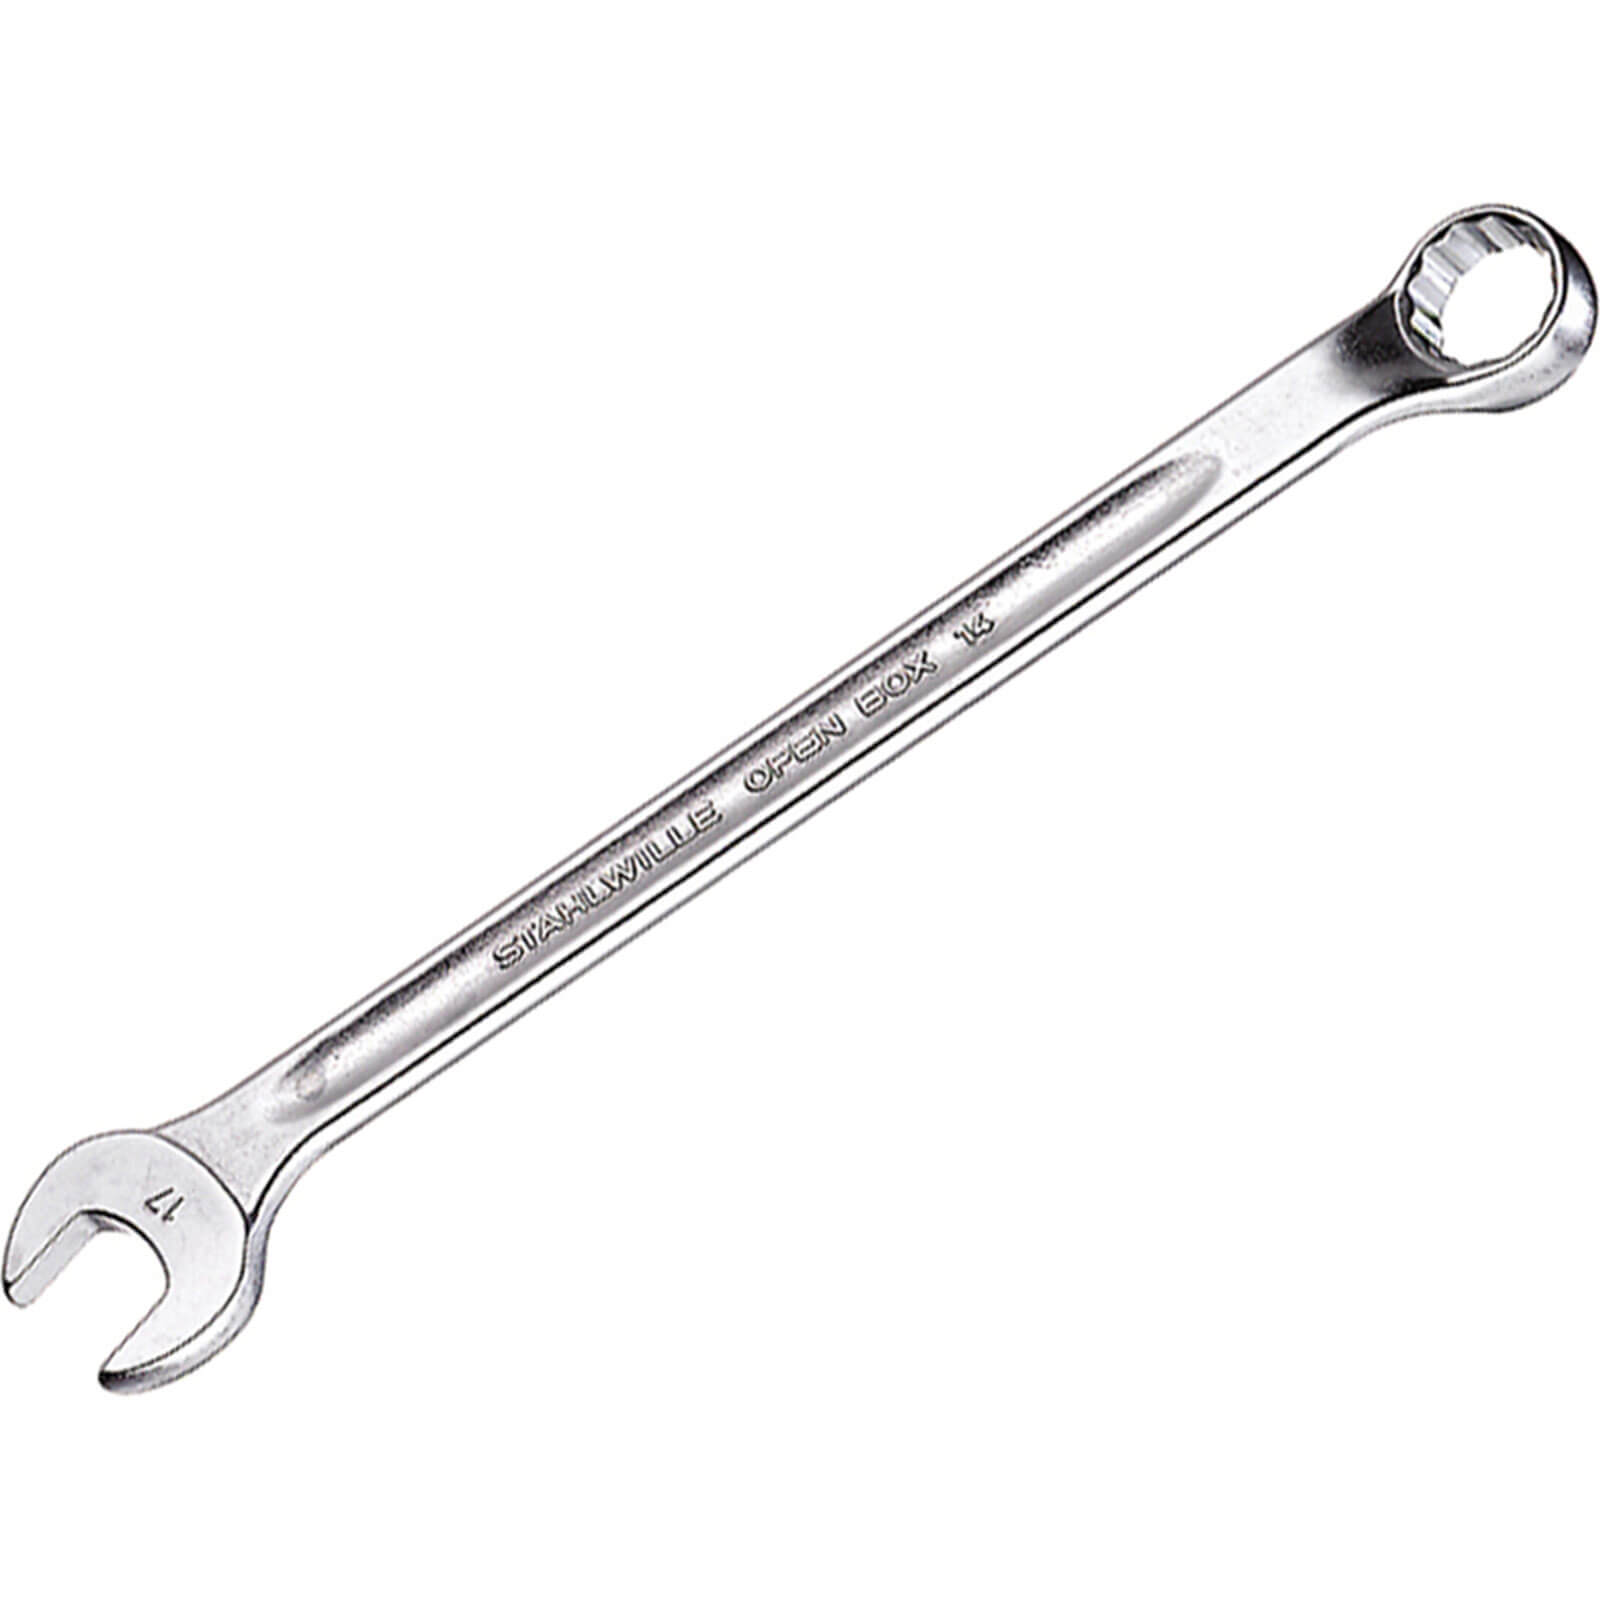 Image of Stahlwille Long Series Combination Spanner 11mm